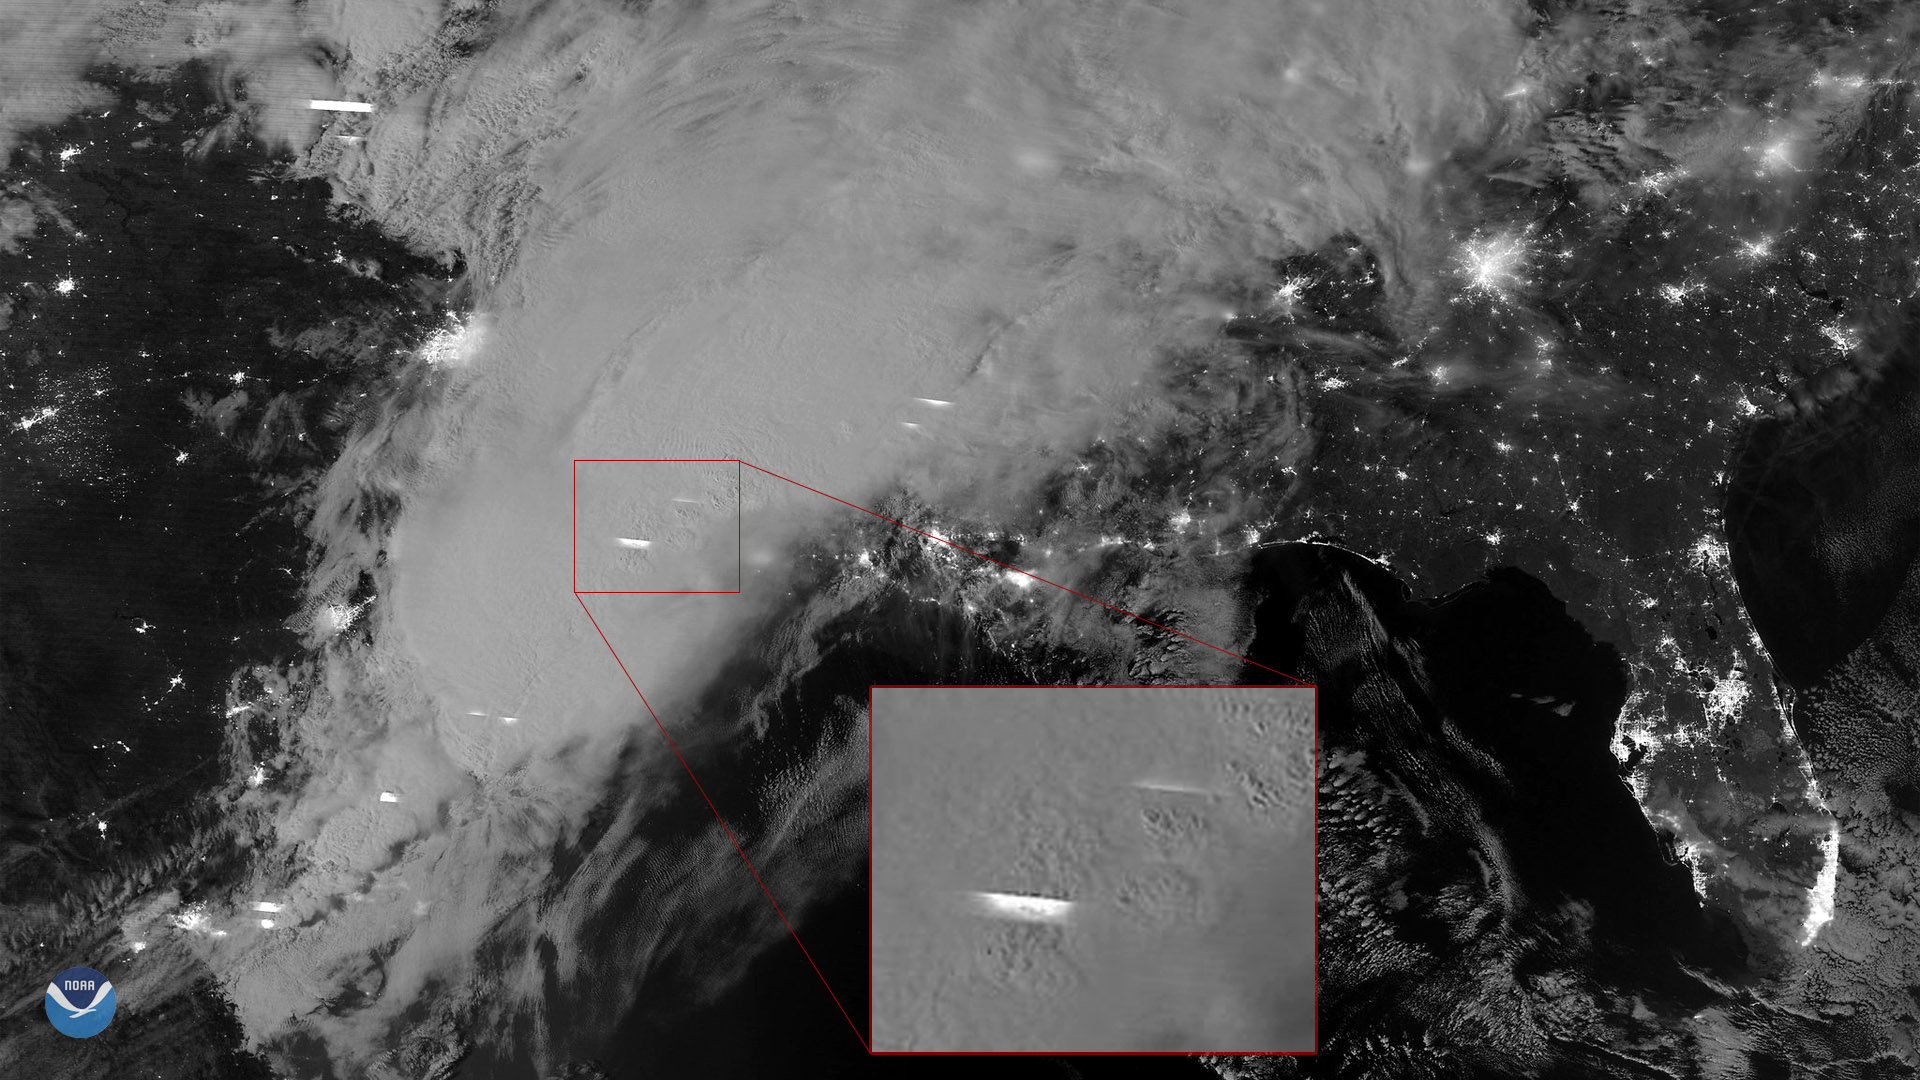 NOAA-20 Captures Nighttime Imagery of Storms in the South